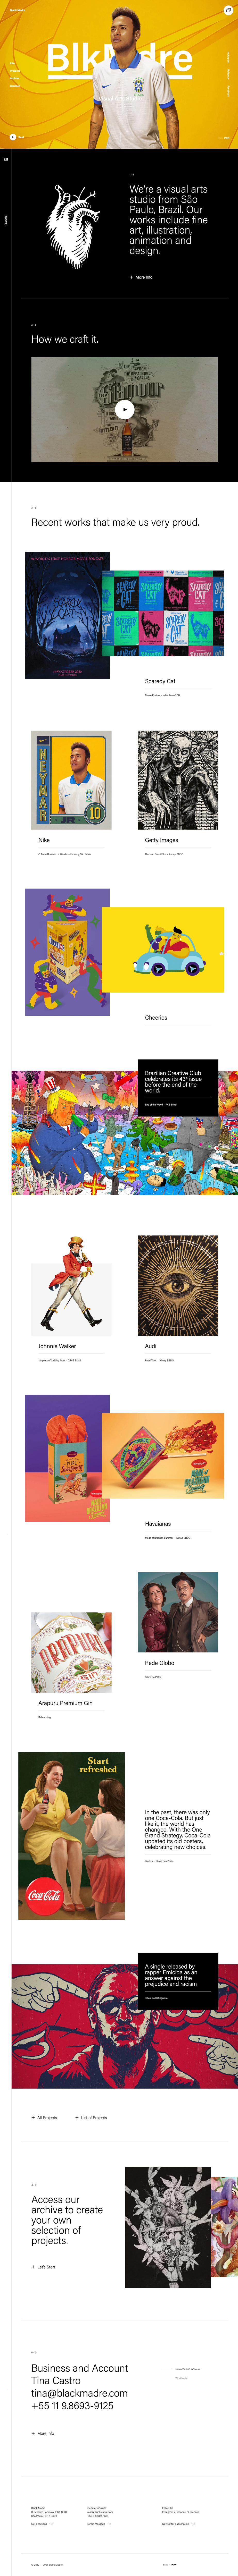 Black Madre Landing Page Example: Studio of fine art, illustration and design, based in Sao Paulo, Brazil.